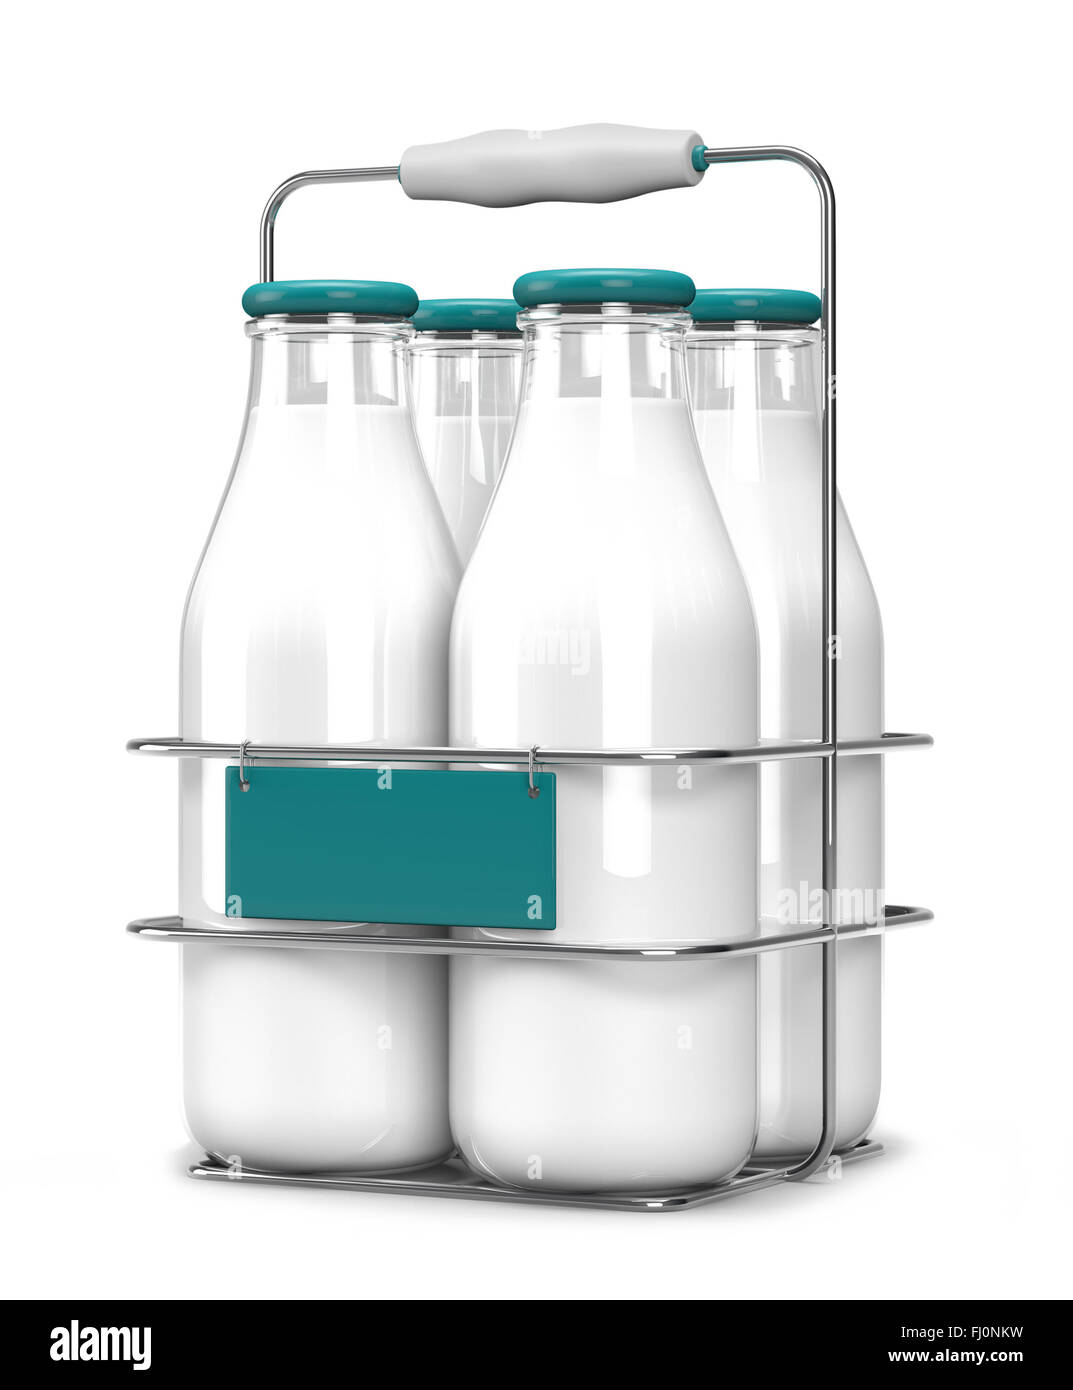 https://c8.alamy.com/comp/FJ0NKW/four-glass-bottles-of-milk-with-light-blue-caps-in-a-metal-carrying-FJ0NKW.jpg